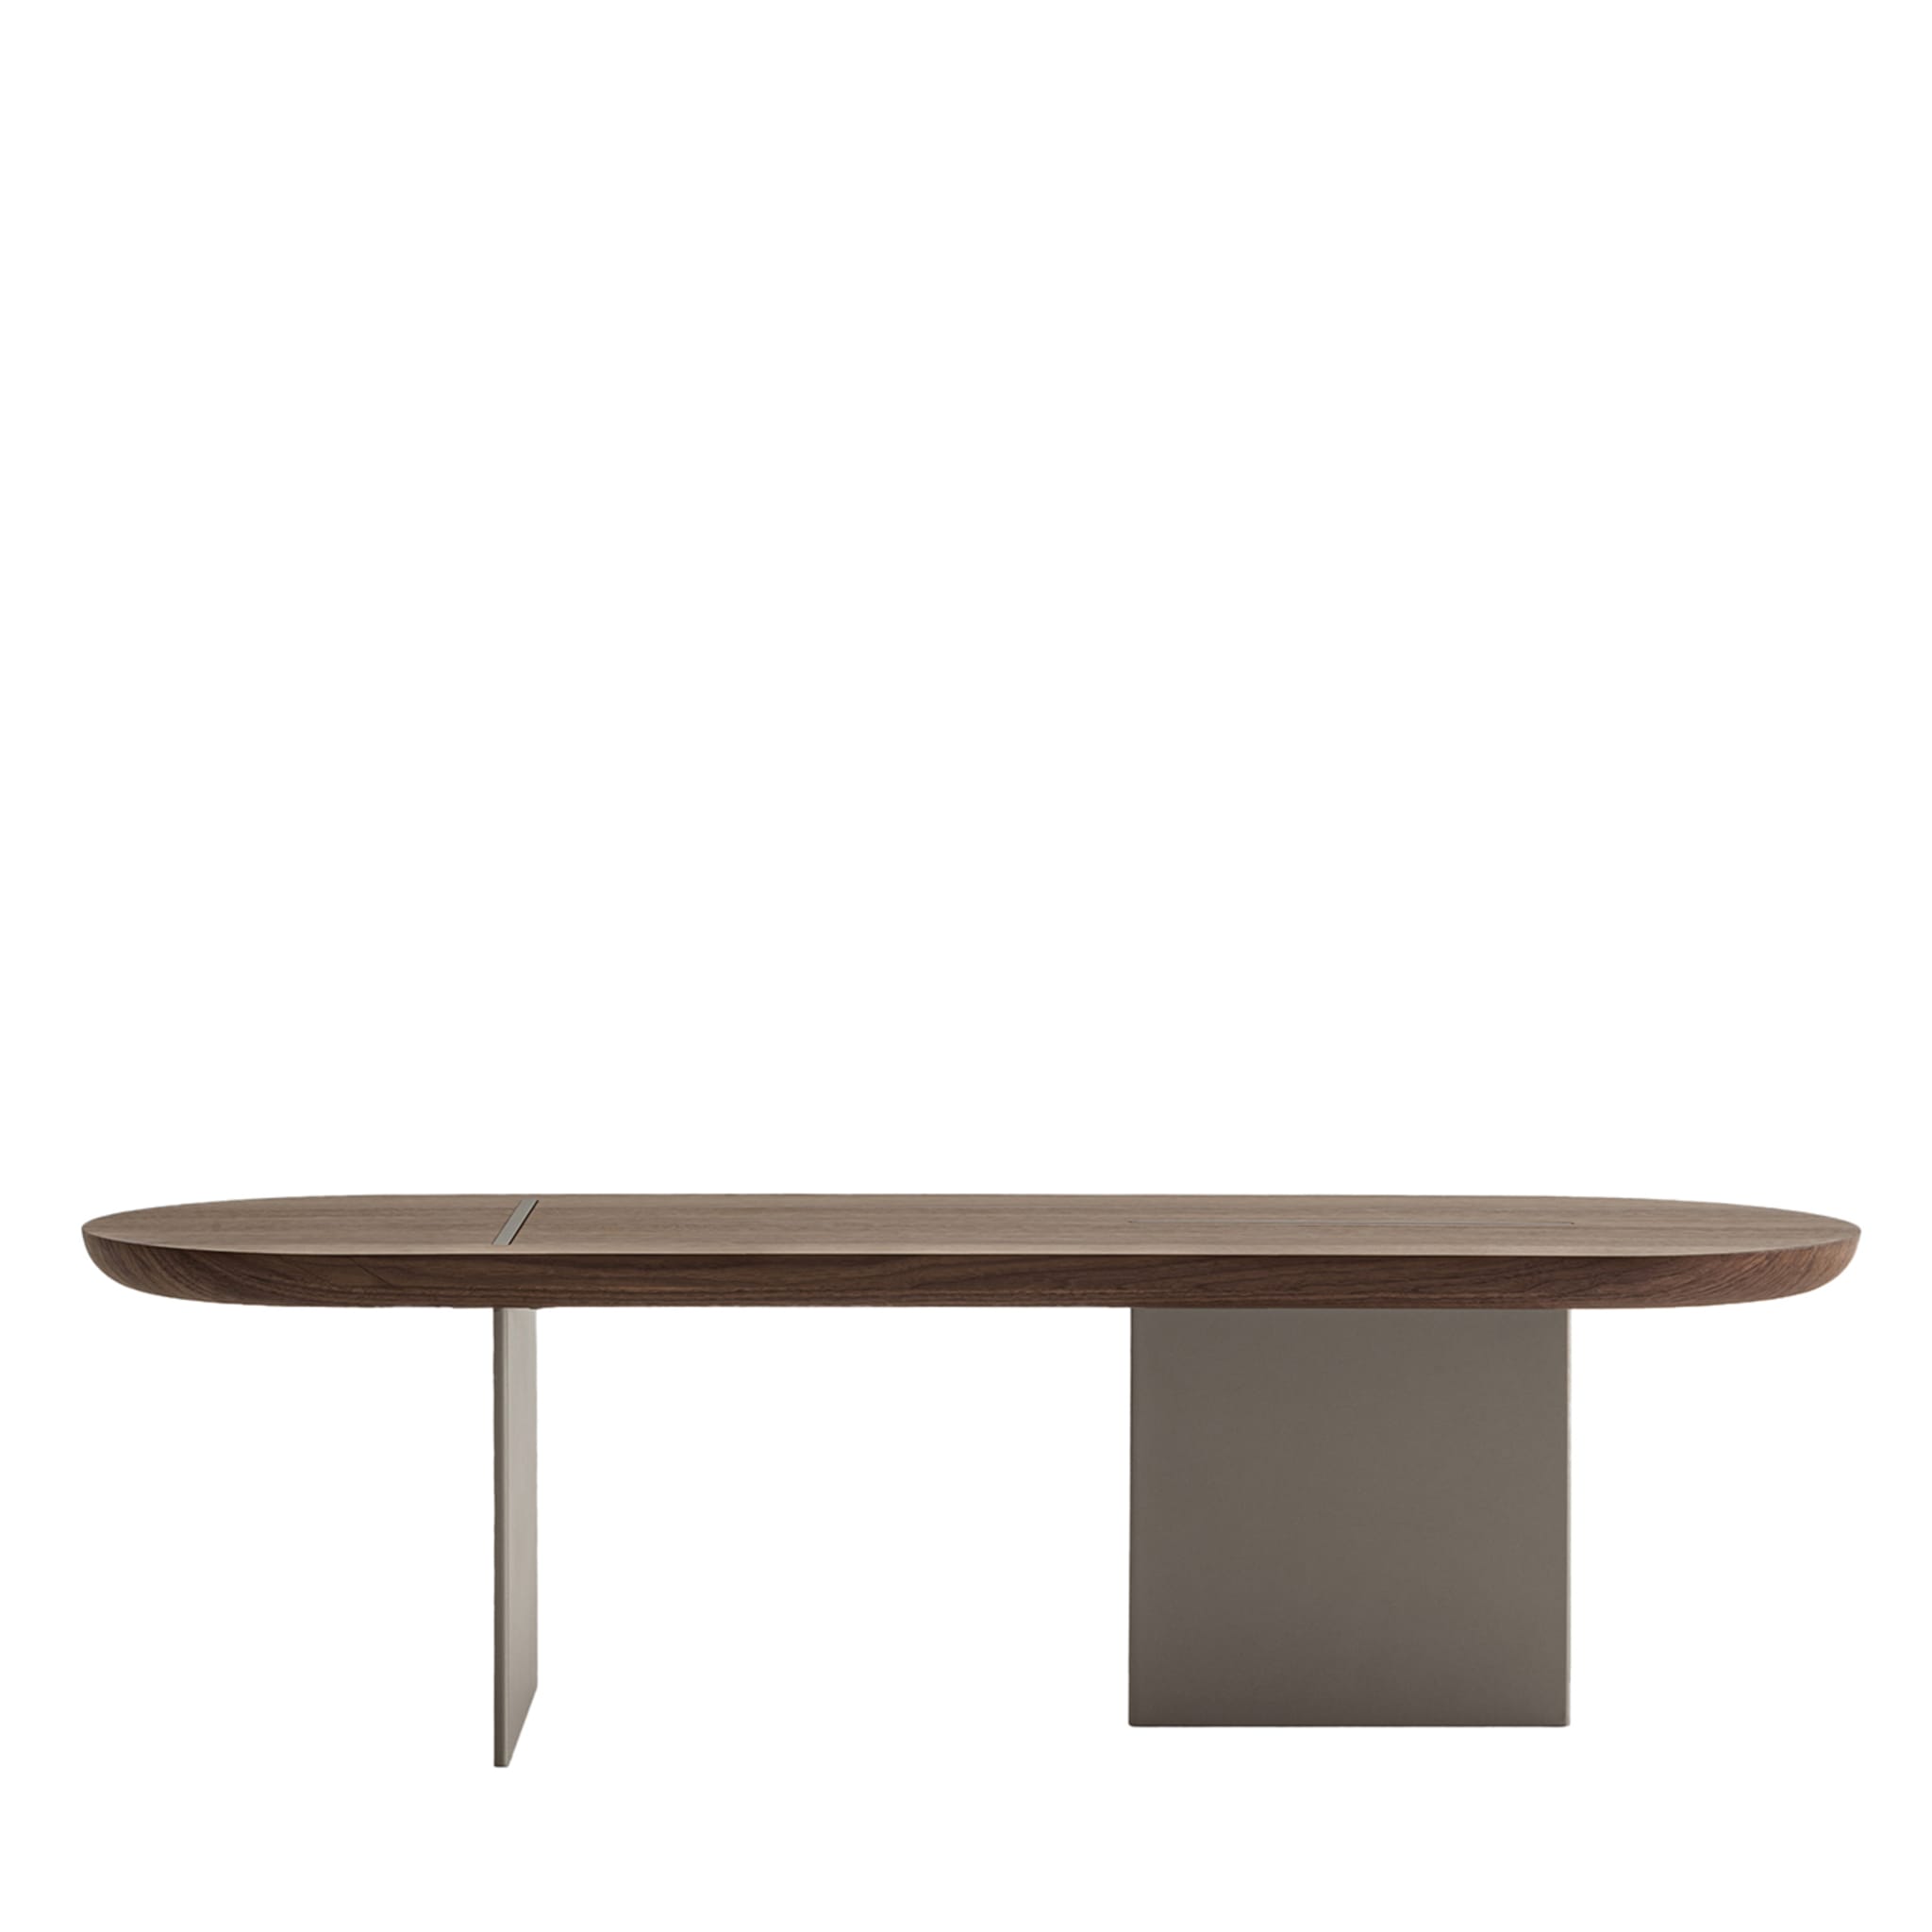 Baguette Tall Rounded Canaletto Walnut Coffee Table - Main view